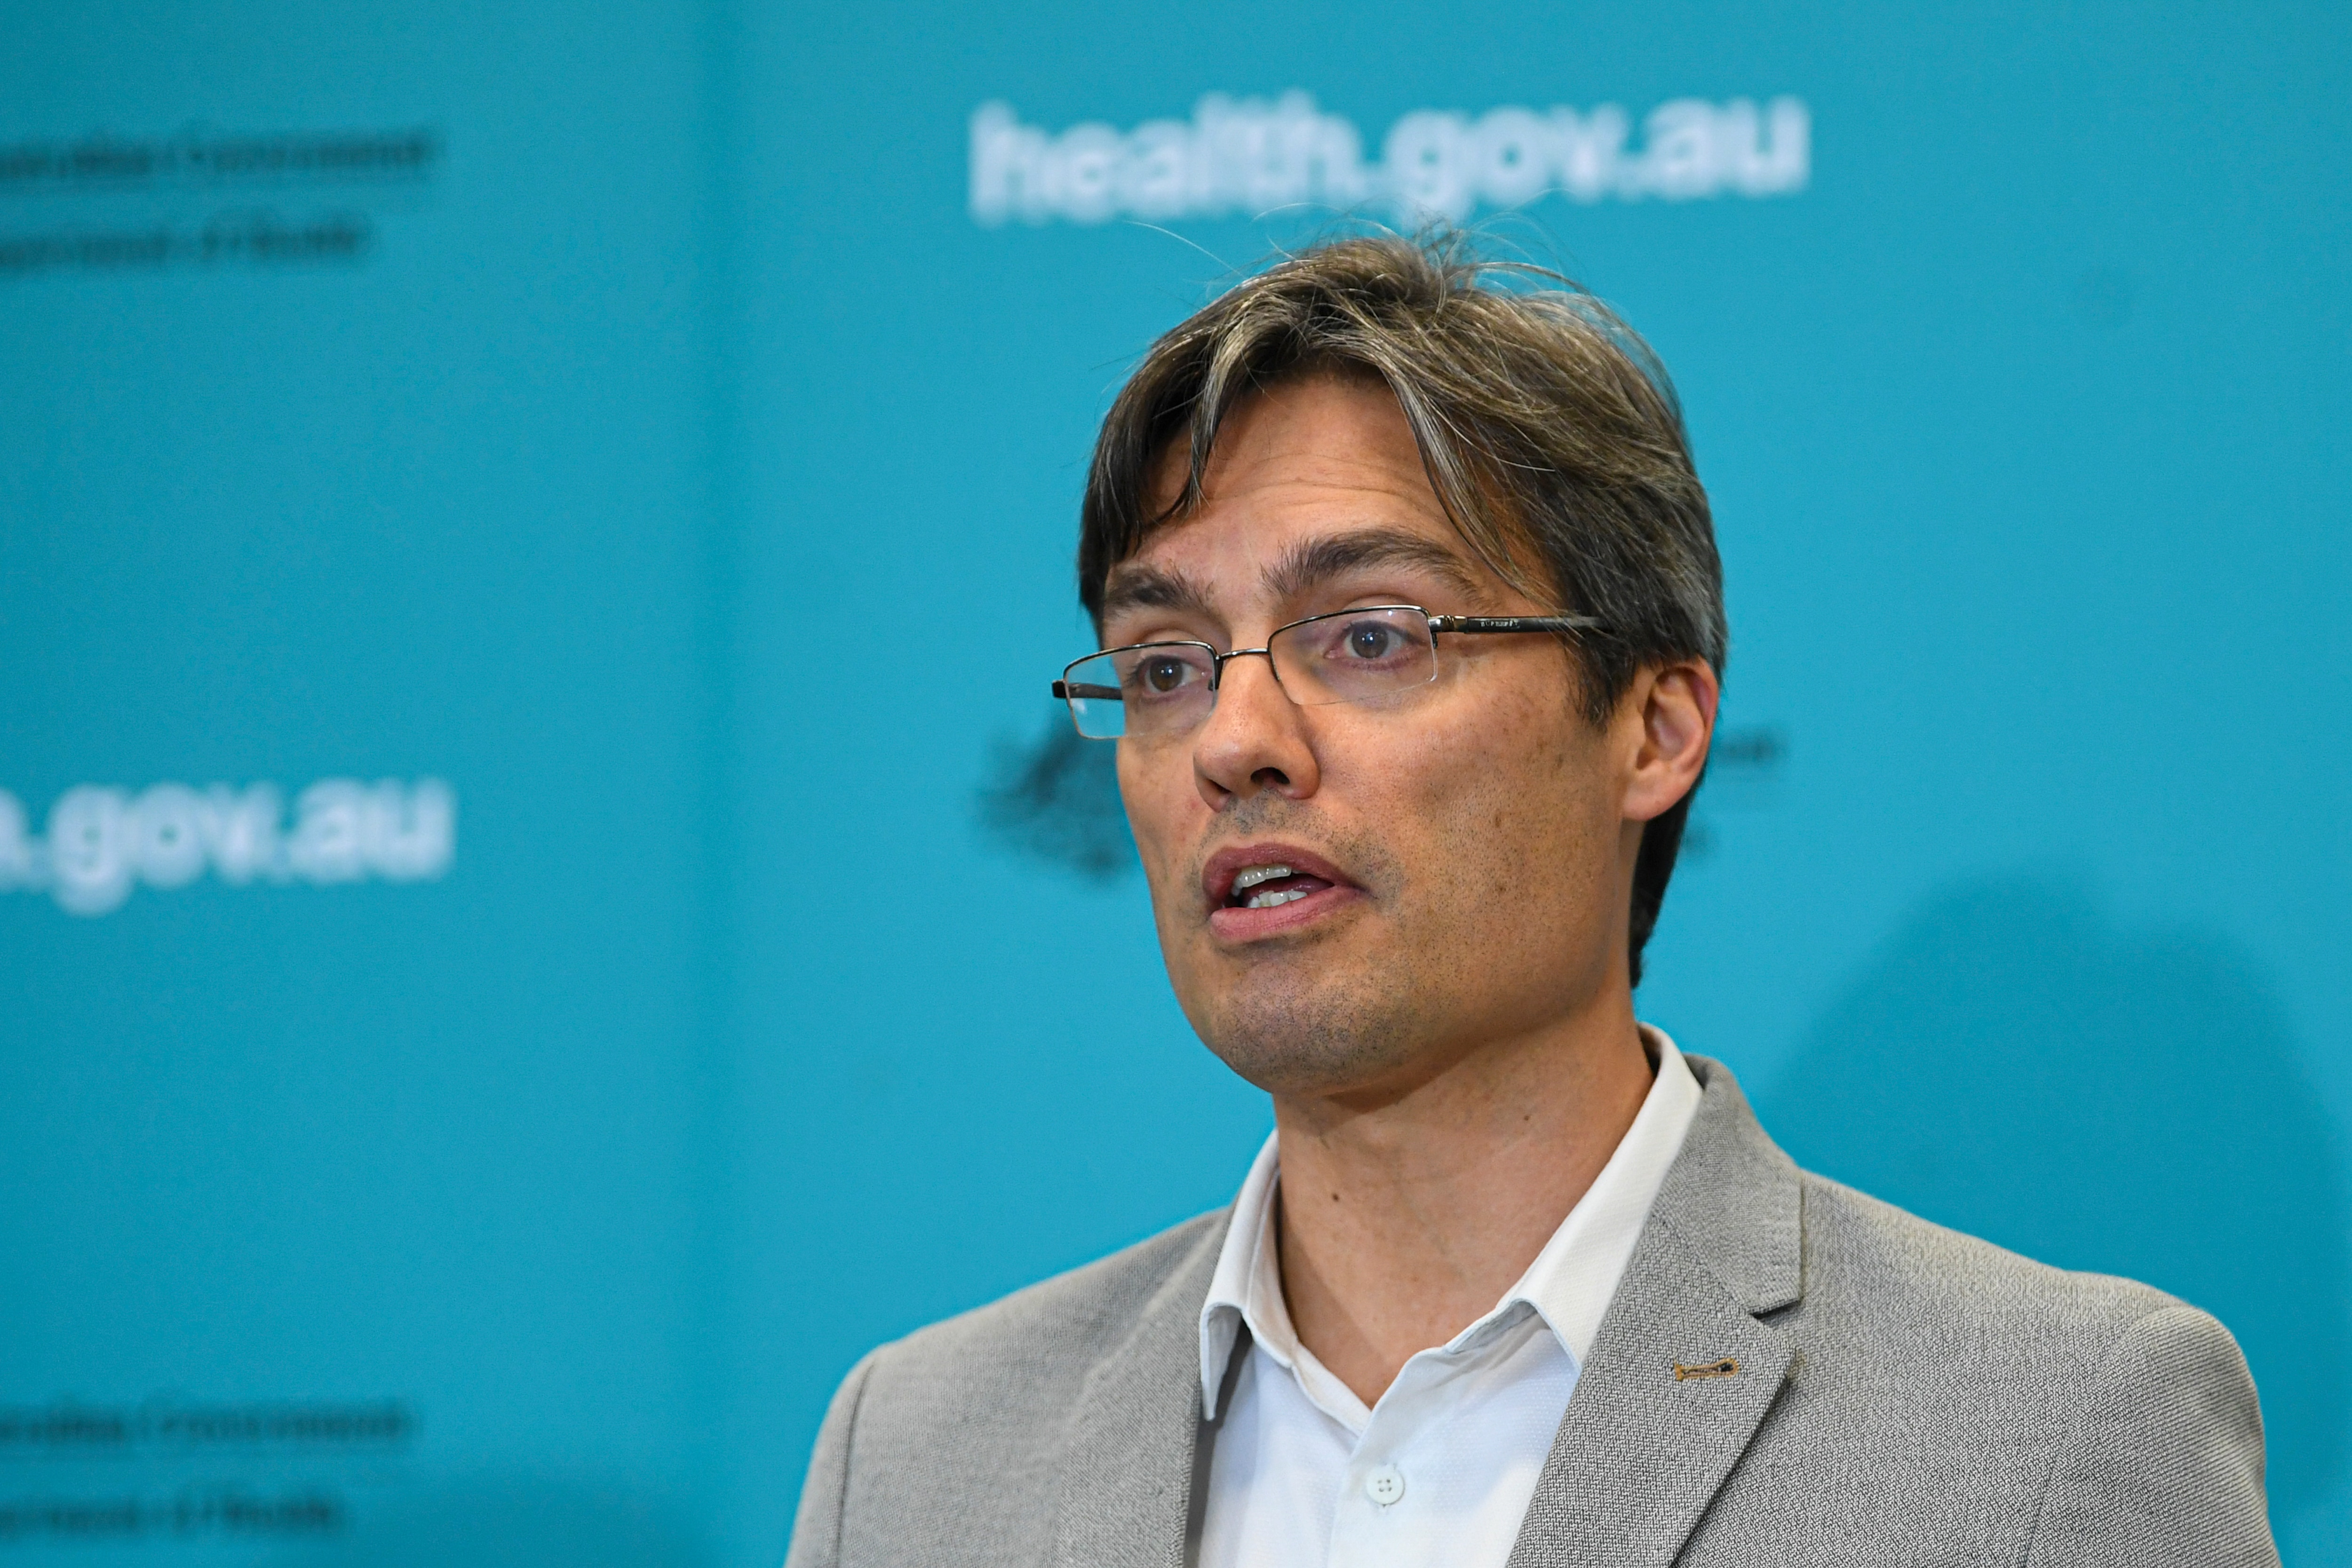 Deputy Chief Medical Officer Nick Coatsworth speaks to the media during a press conference at the Australian Department of Health in Canberra, Wednesday, September 9, 2020. (AAP Image/Lukas Coch) NO ARCHIVING